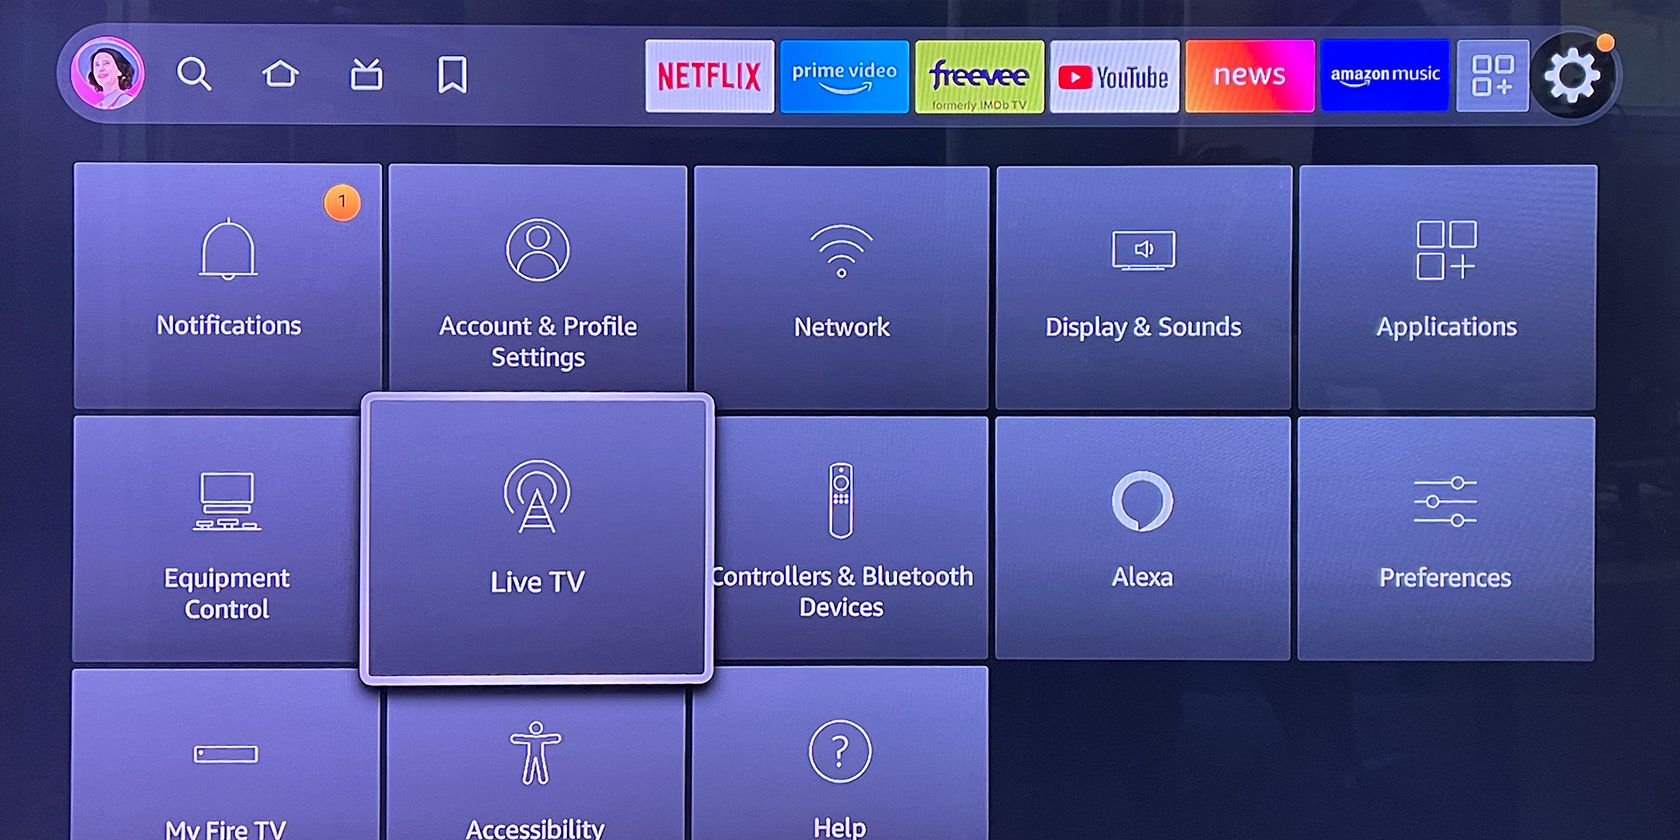 How to Use Advanced Settings on the Amazon Fire TV Stick